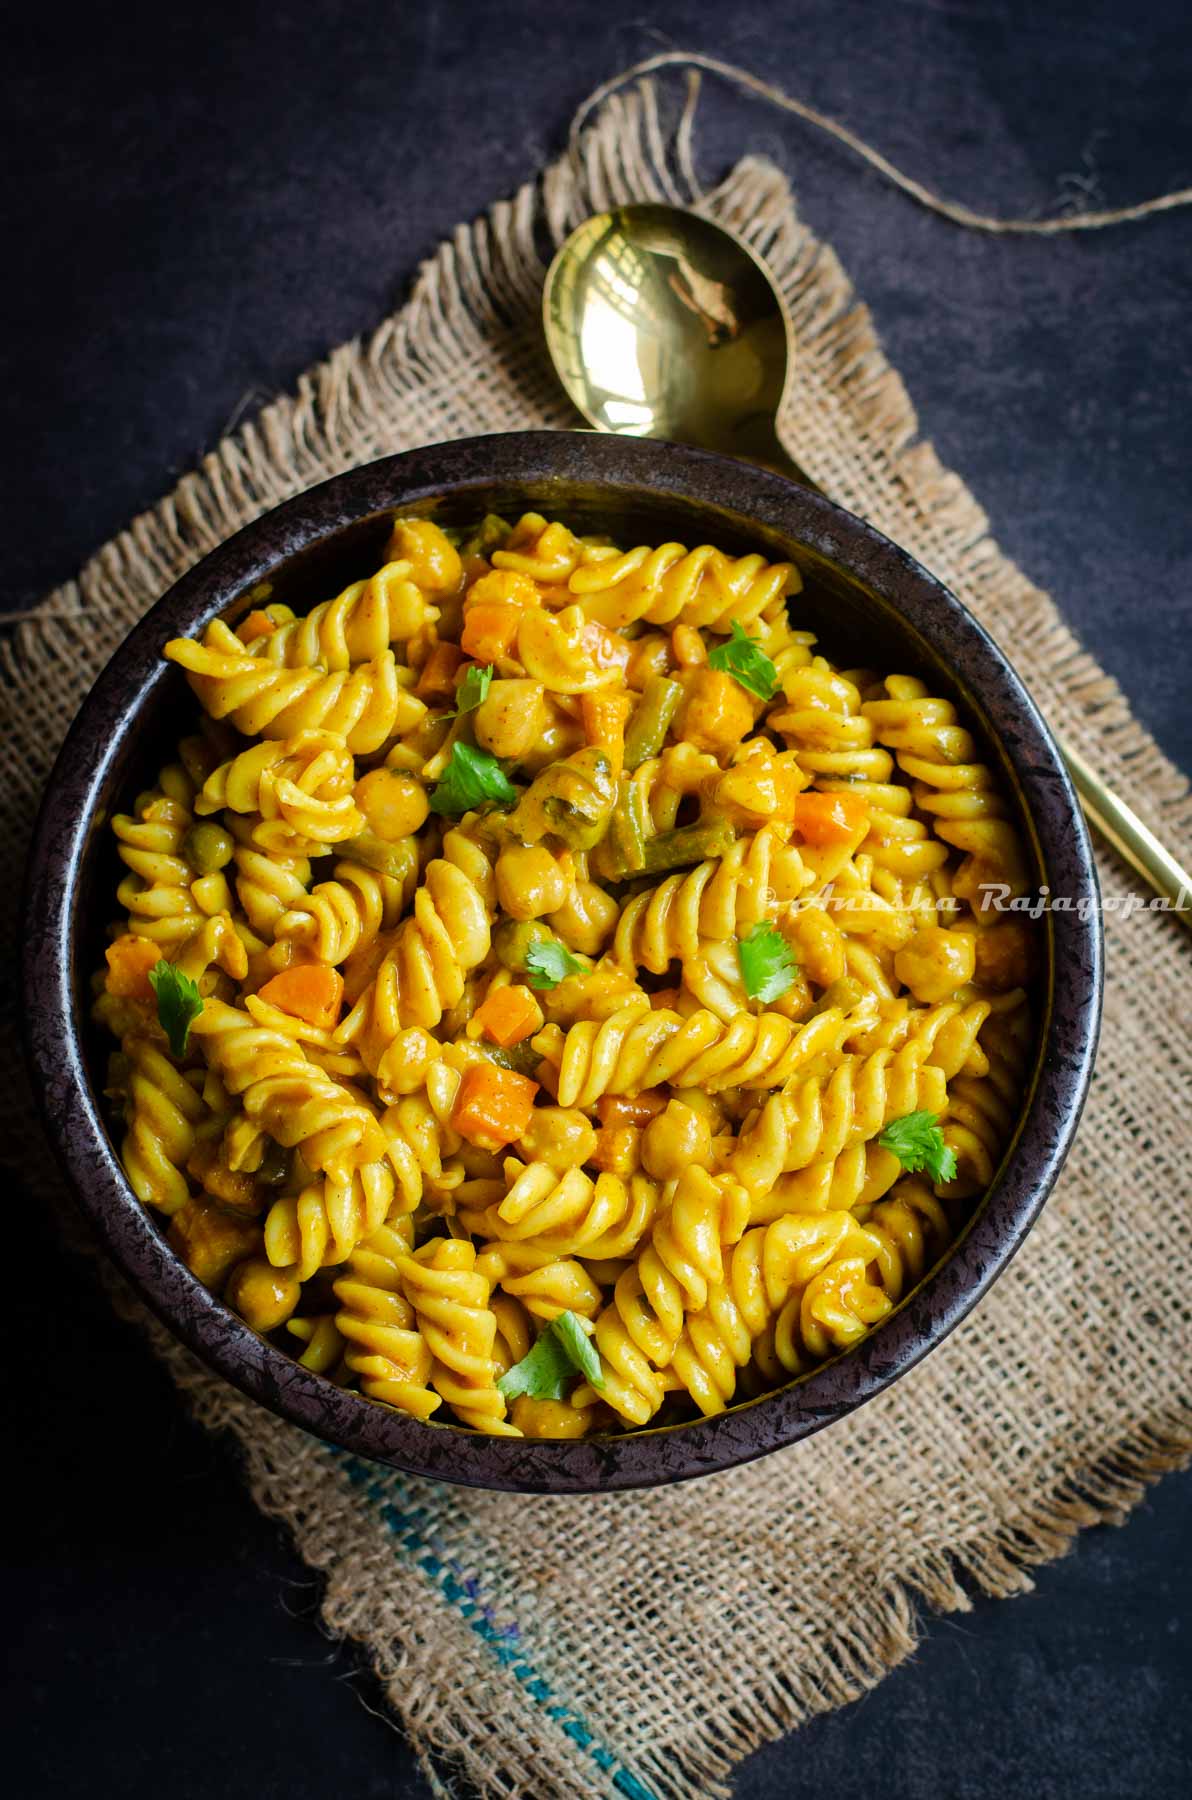 Hearty curry pasta served in a black bowl with a golden spoon.